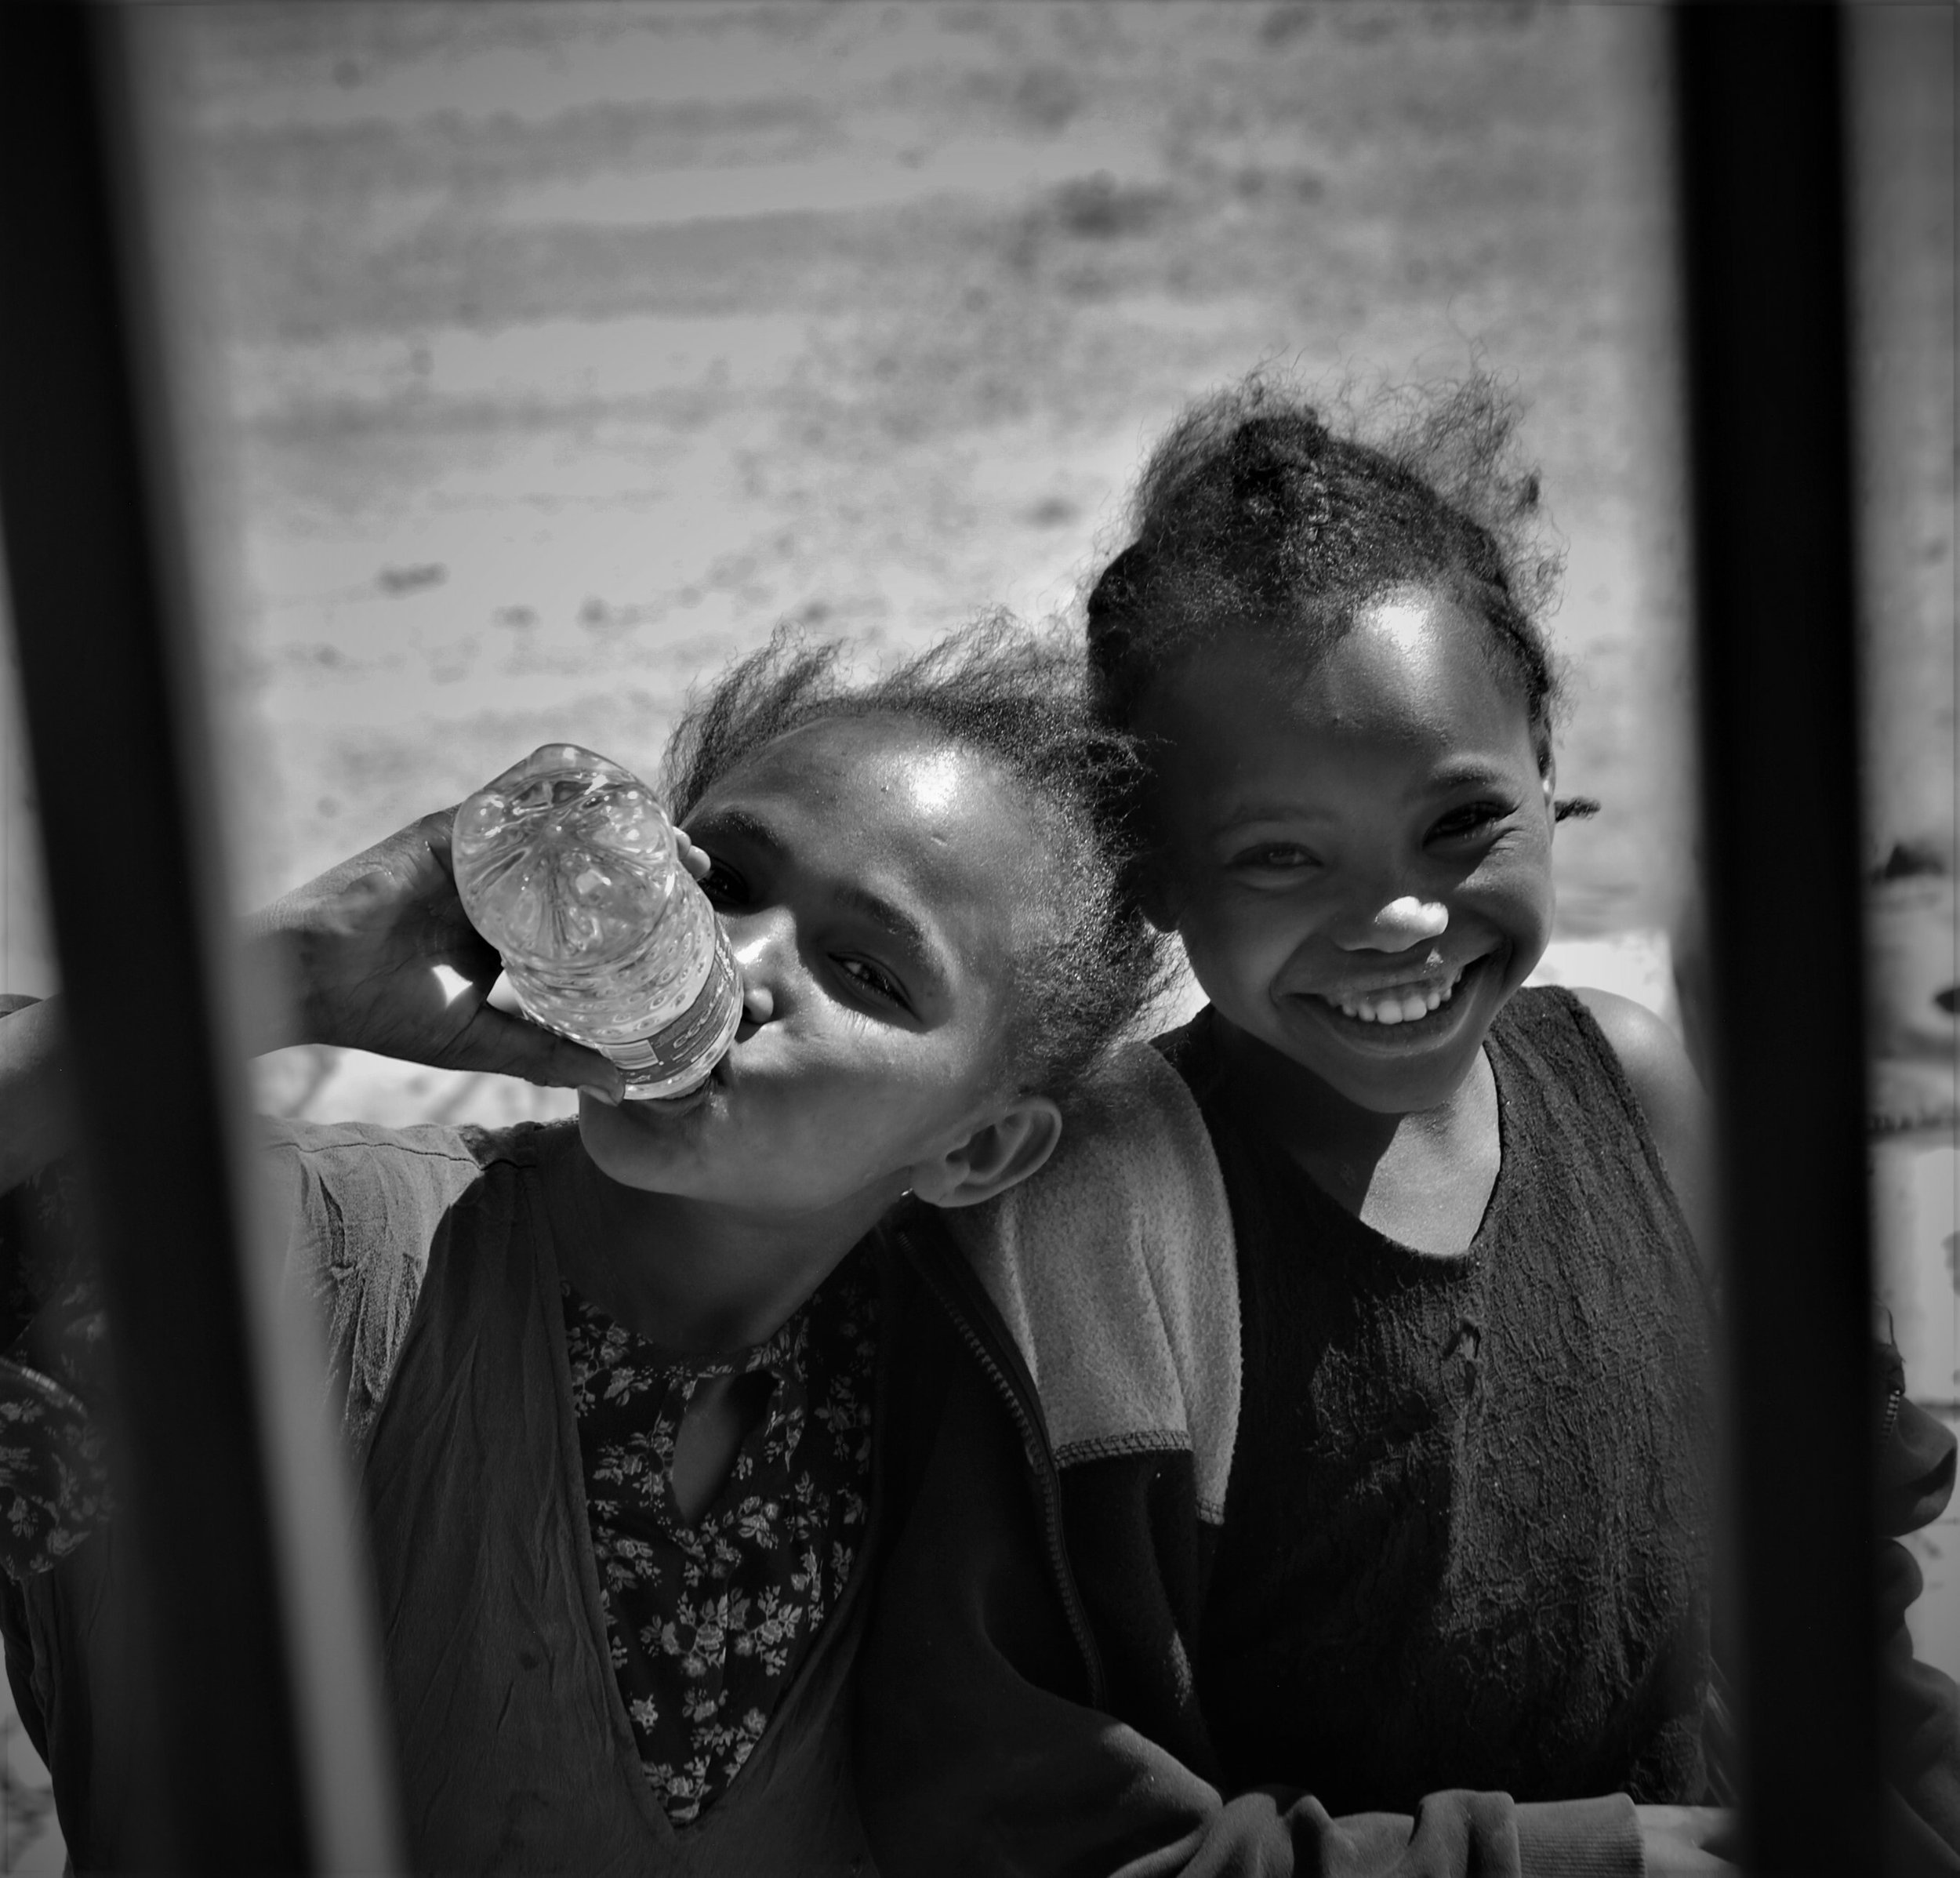  23. Two little girls laugh and smile, eyes twinkling and faces beaming with joy as they enjoy a moment of fun and happiness. 